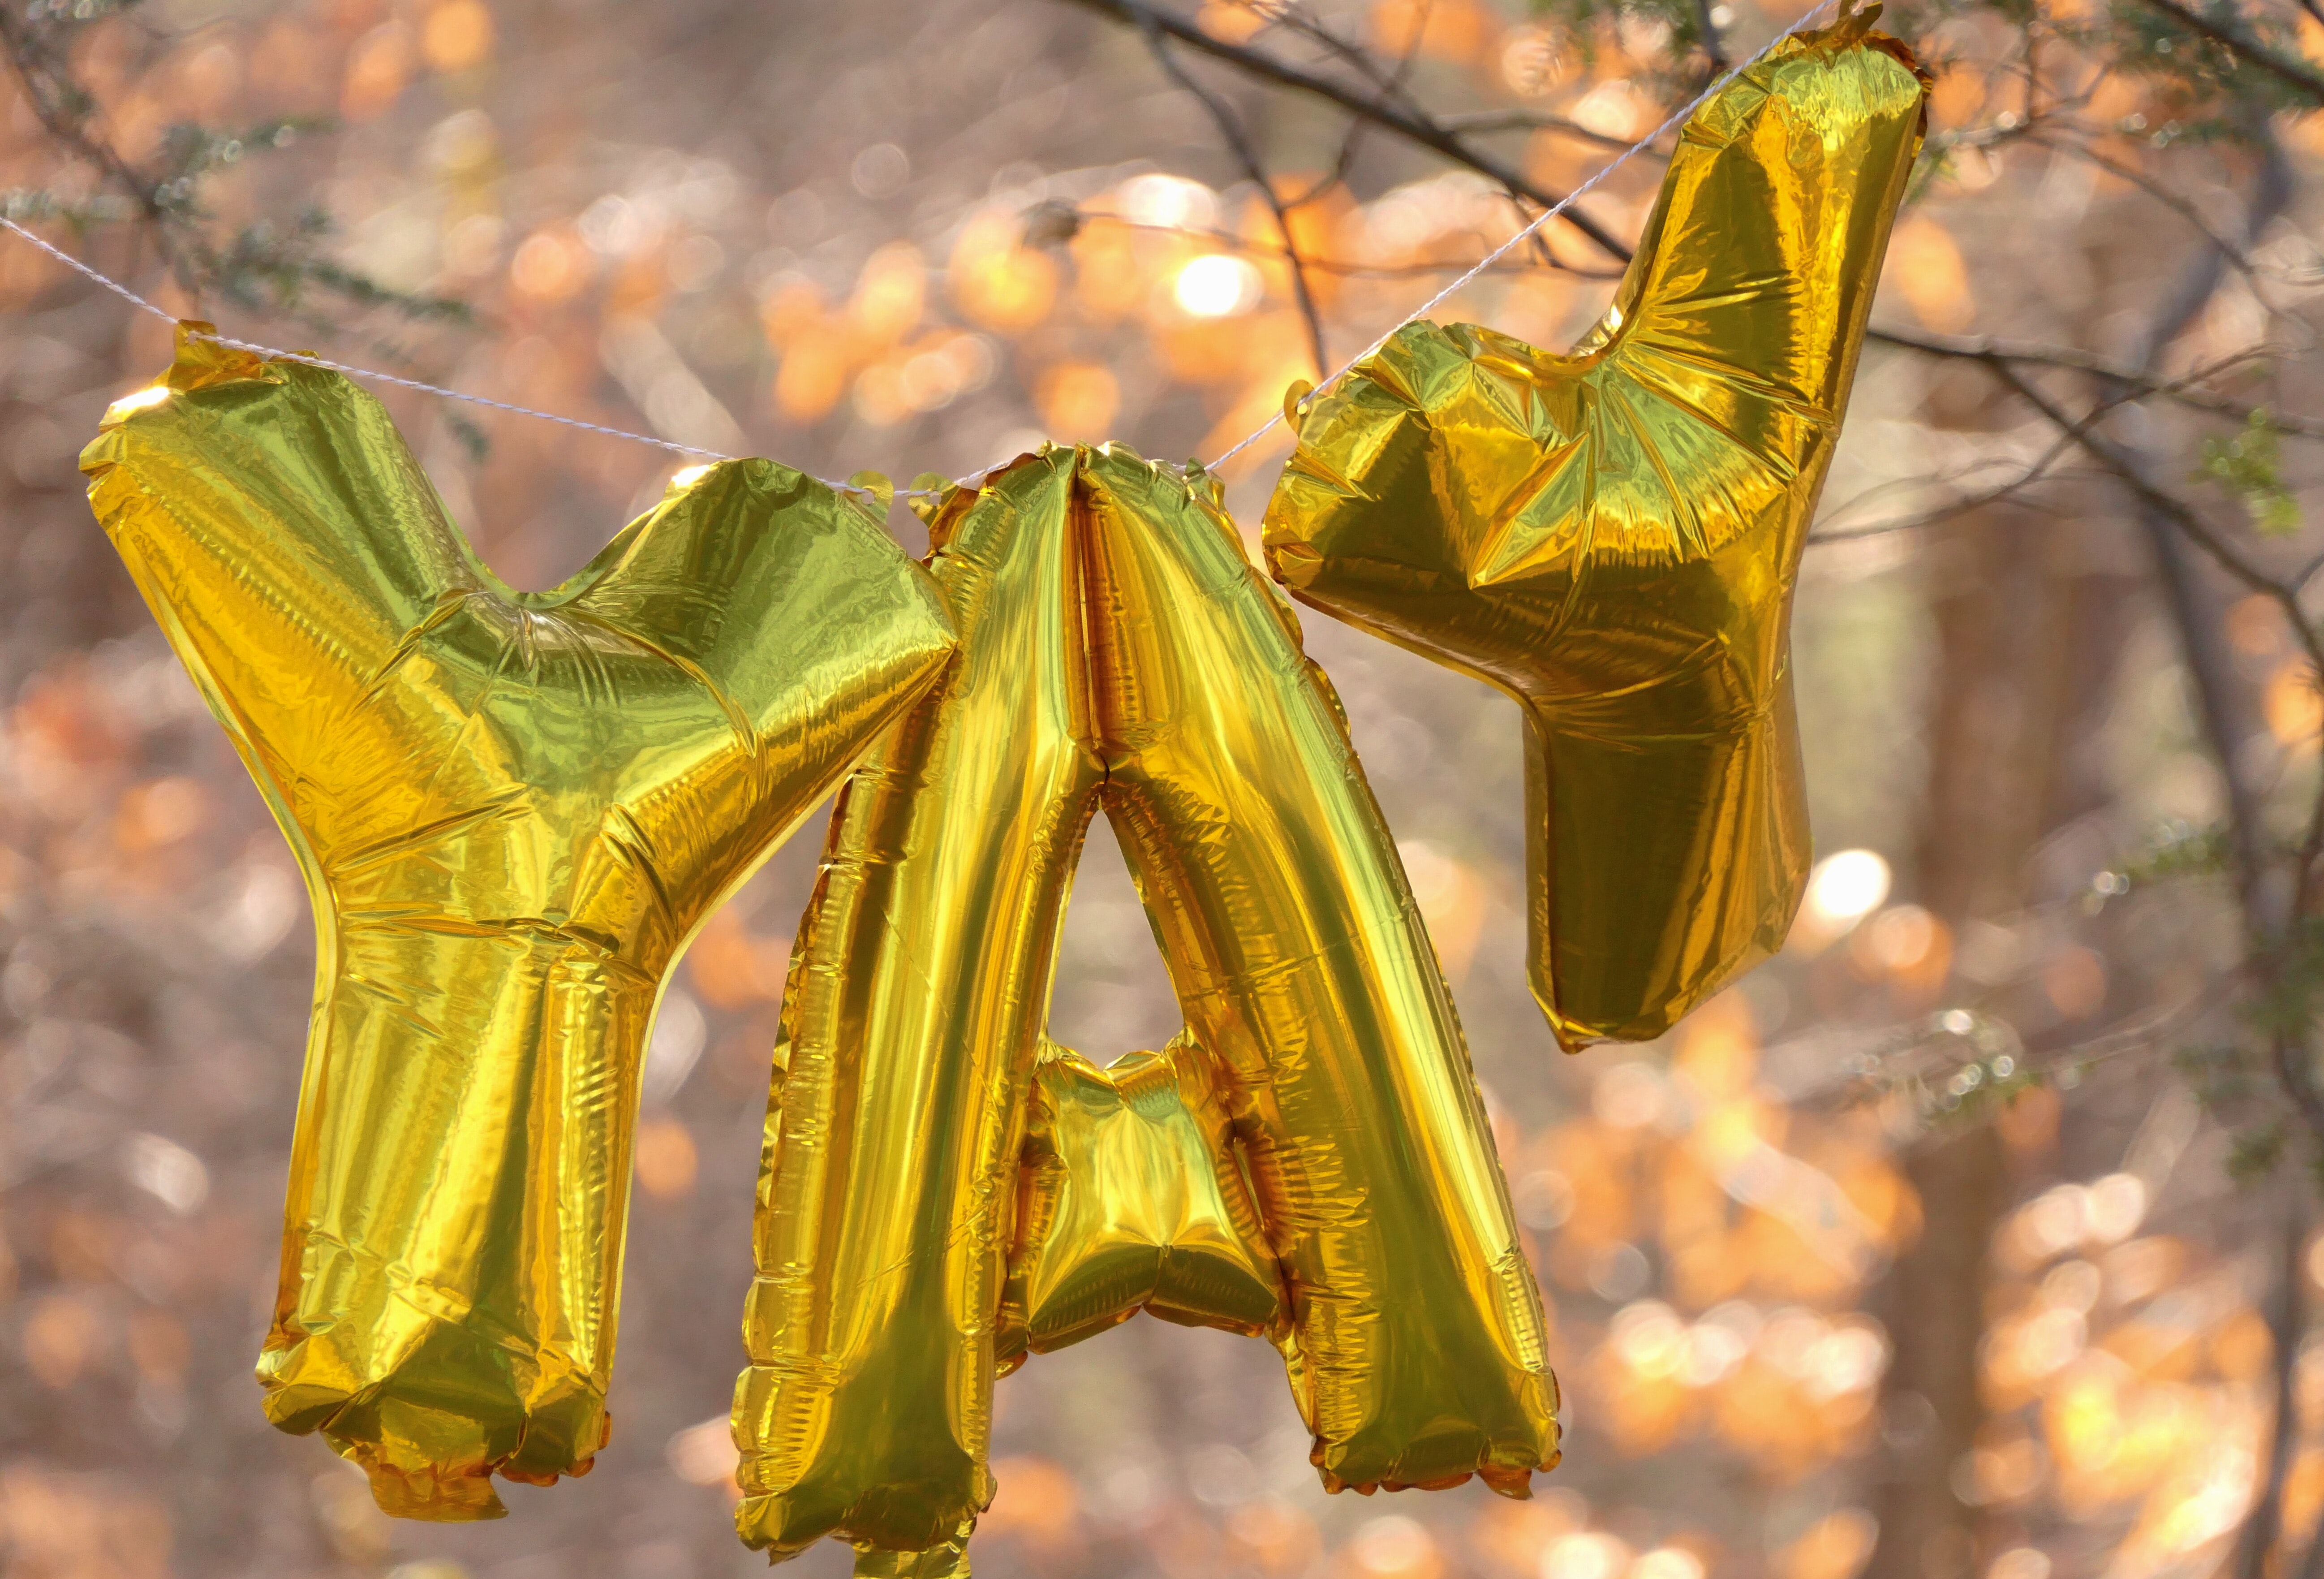 Gold foil balloons spell the word YAY while suspended from a string in the sunshine